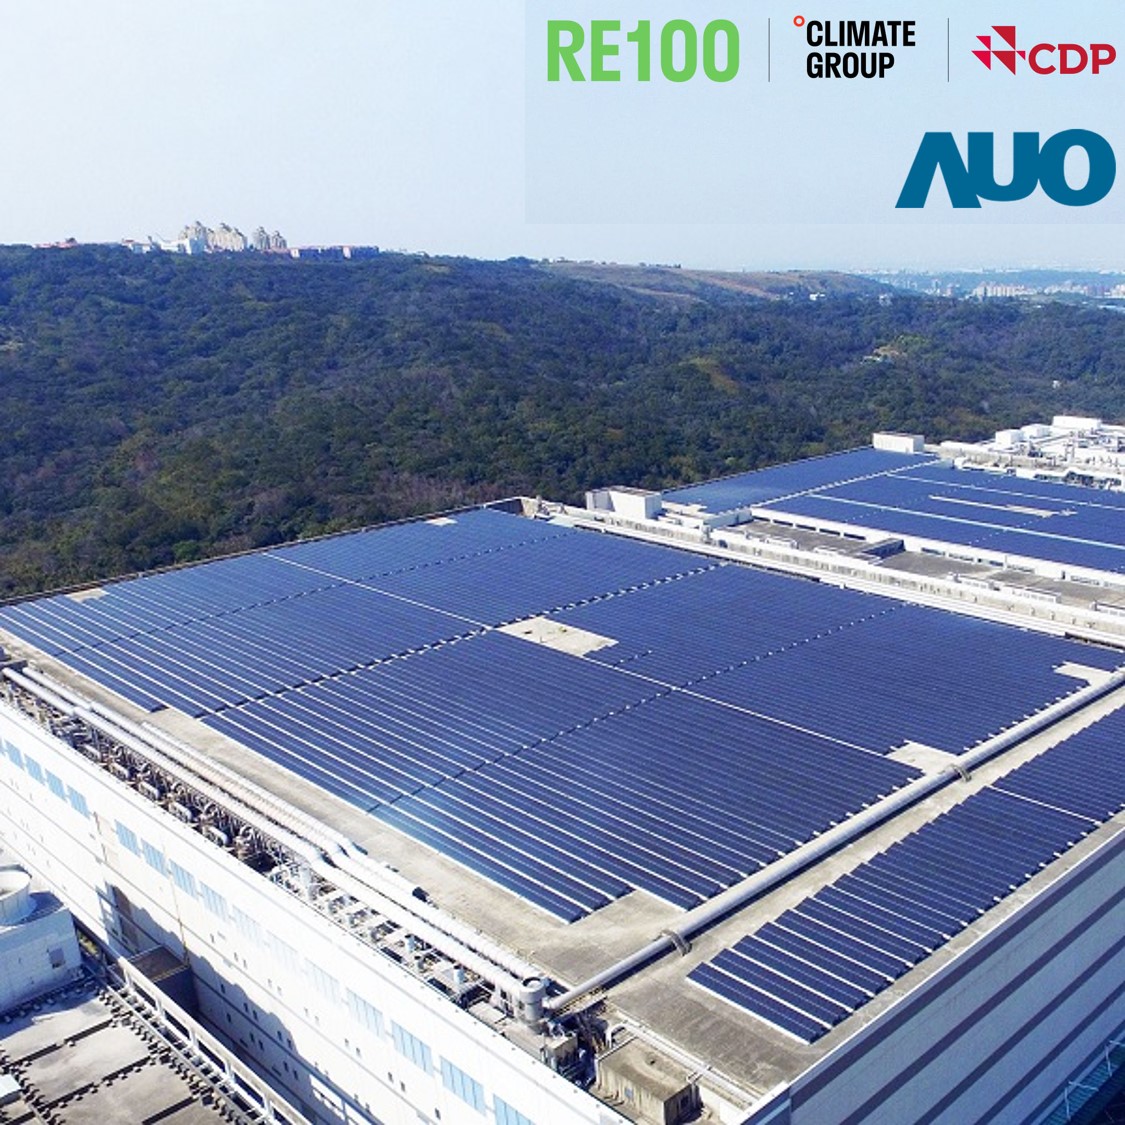 AUO Joins RE100 Initiative and Commits to 100% Renewable Energy by 2050